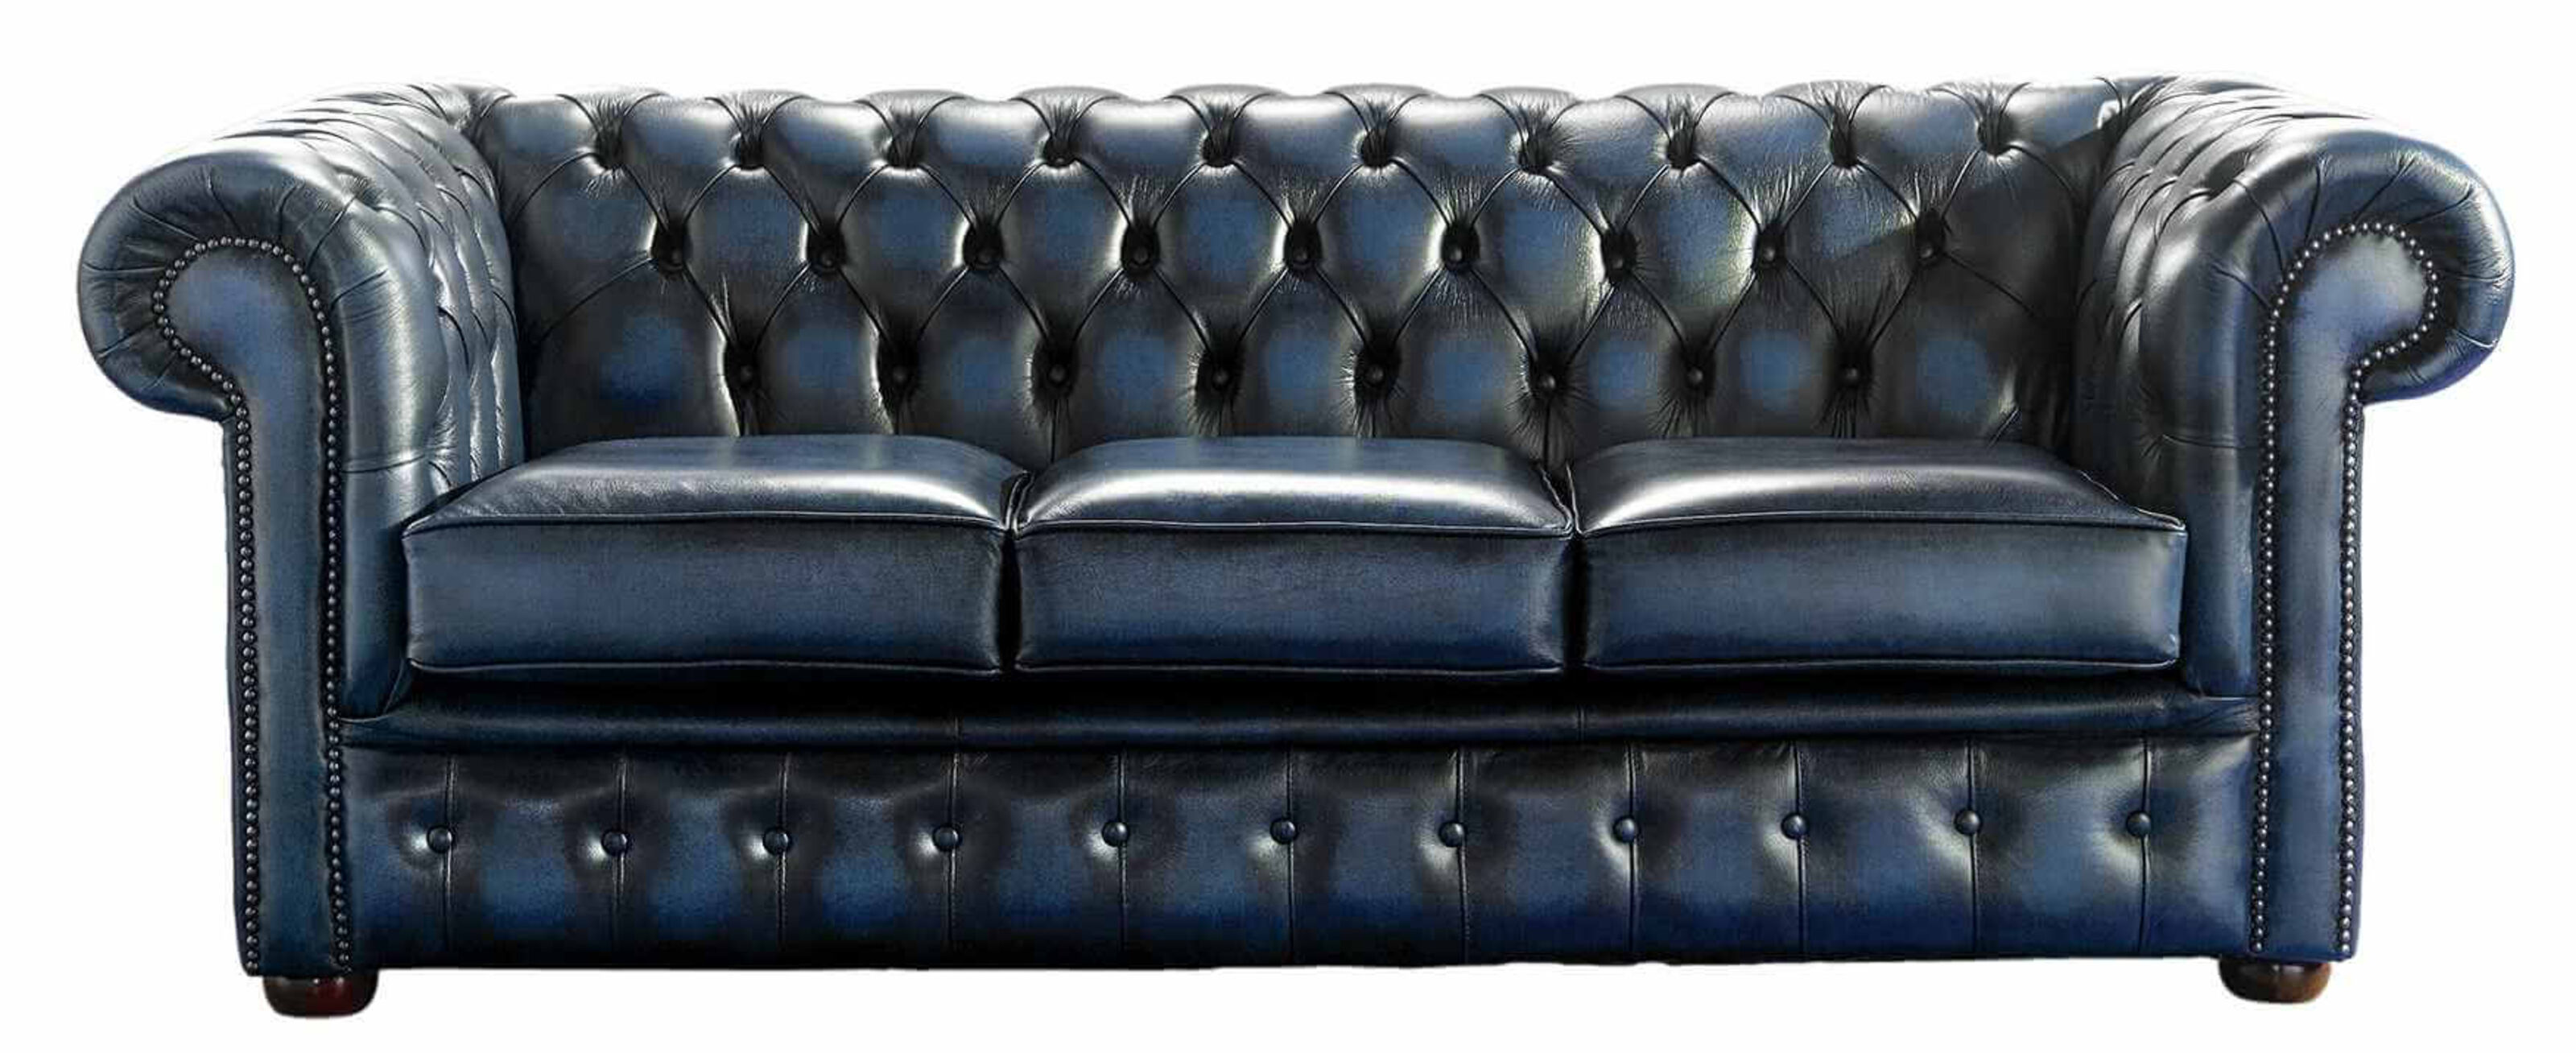 The Artistry Behind Crafting Chesterfield Sofas From Design to Perfection  %Post Title